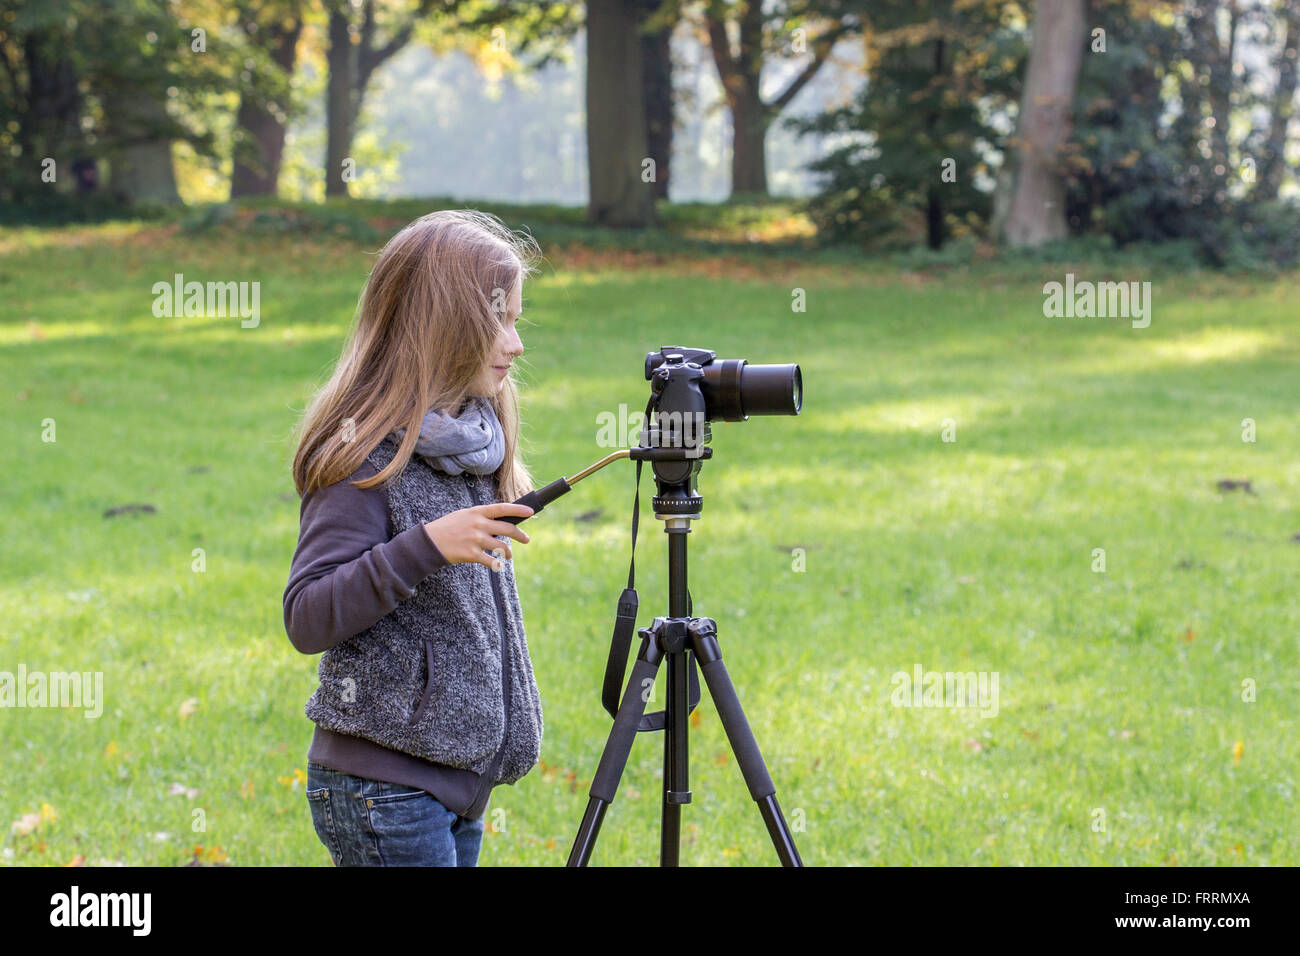 Young girl with a camera on a tripod Stock Photo